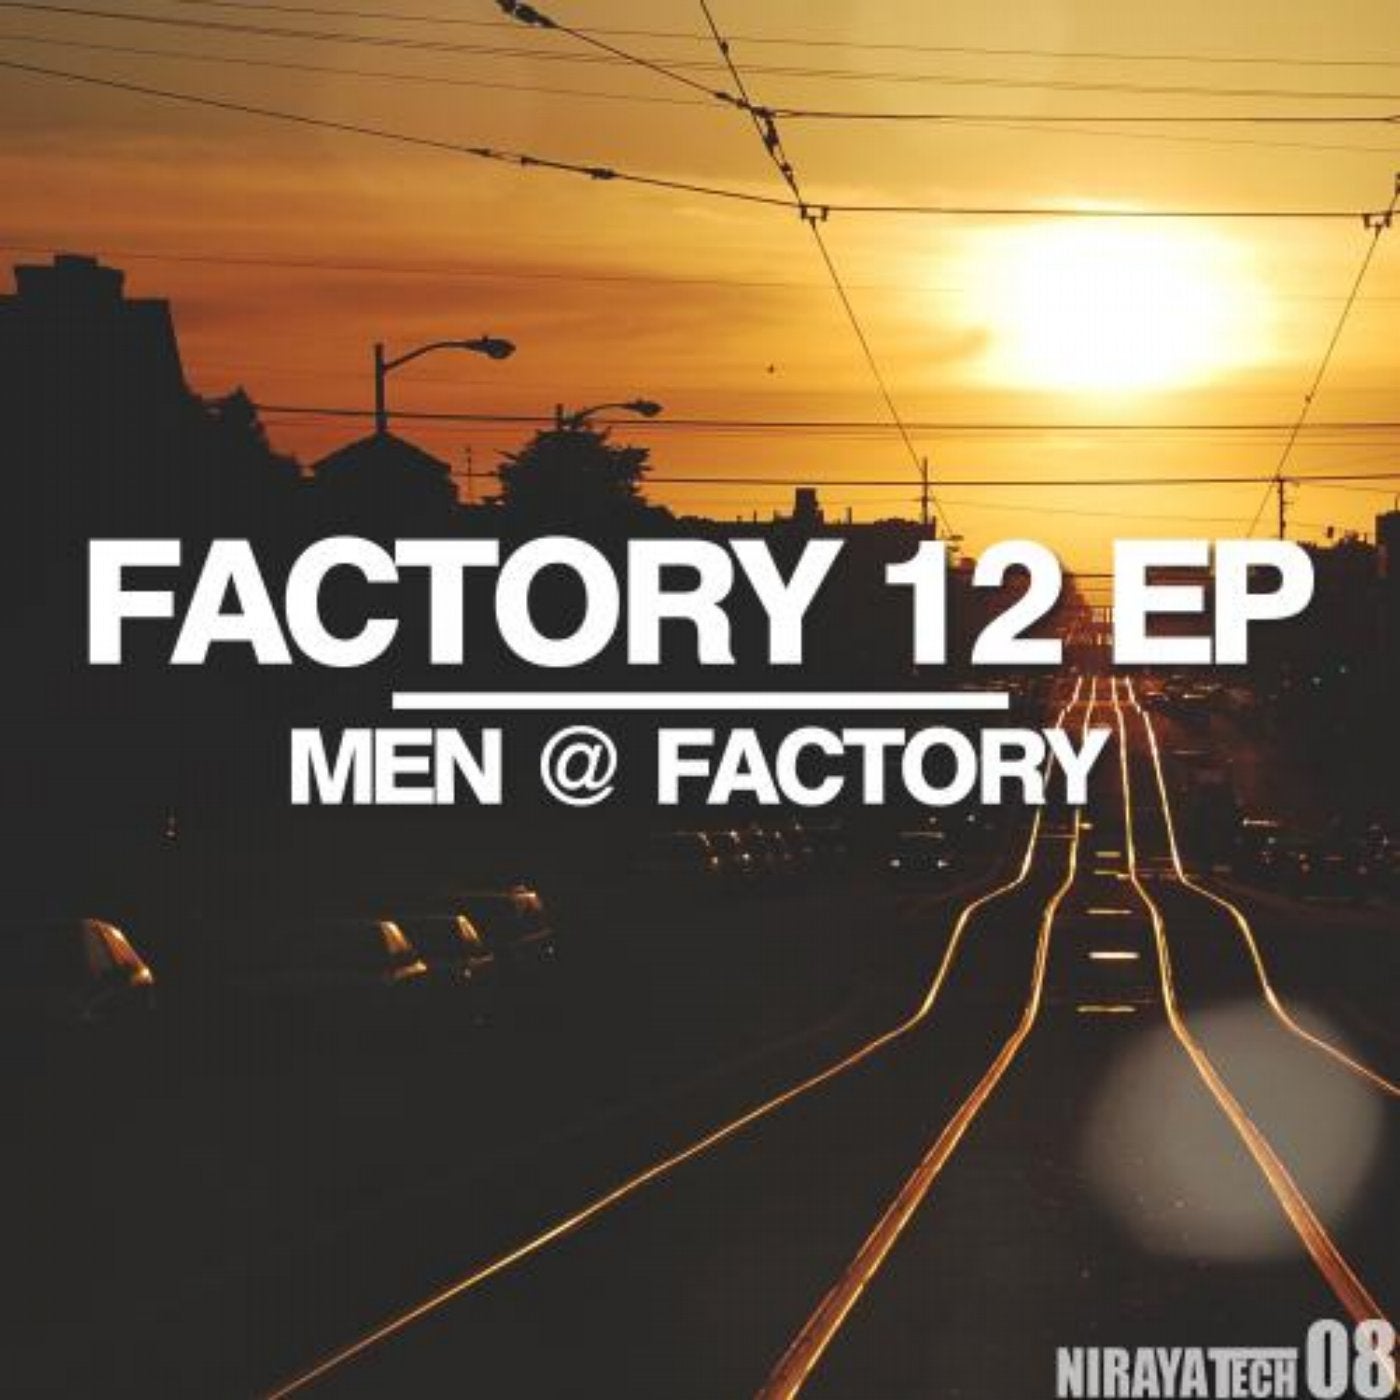 Factory 12 Ep